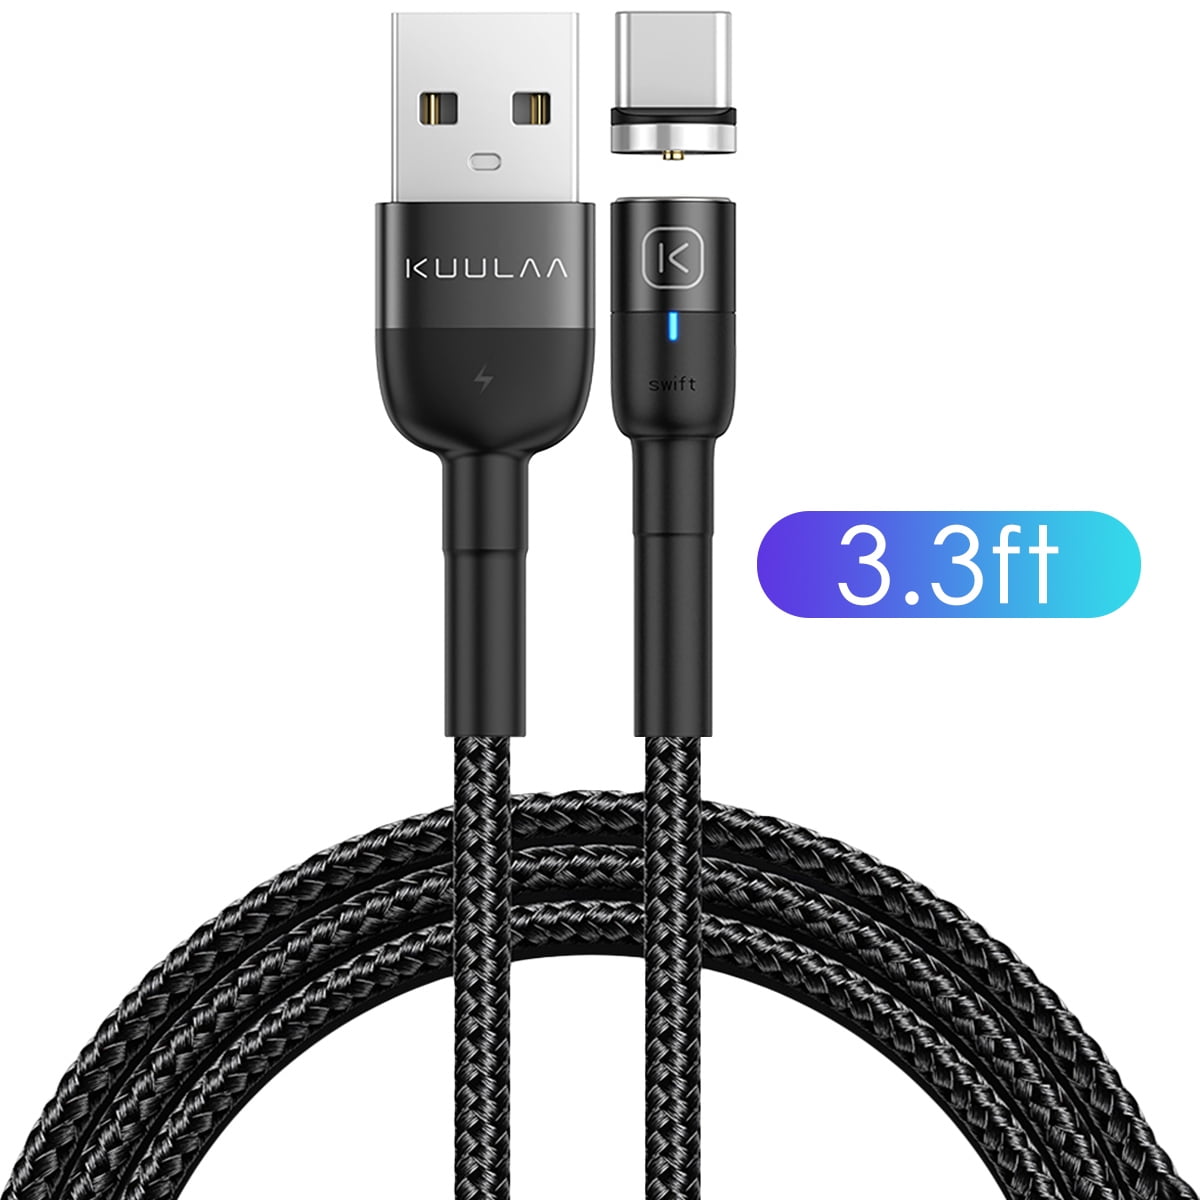 Nylon Braided QC 3.0 Quick Charger Cord 3 Feet Magnetic Charging Cable for Samsung Galaxy S10 S9 S8 Plus Magnetic USB C Cable 3ft Kuulaa 2 Pack Fast Charging Type c Cable 3 Foot with LED Light 